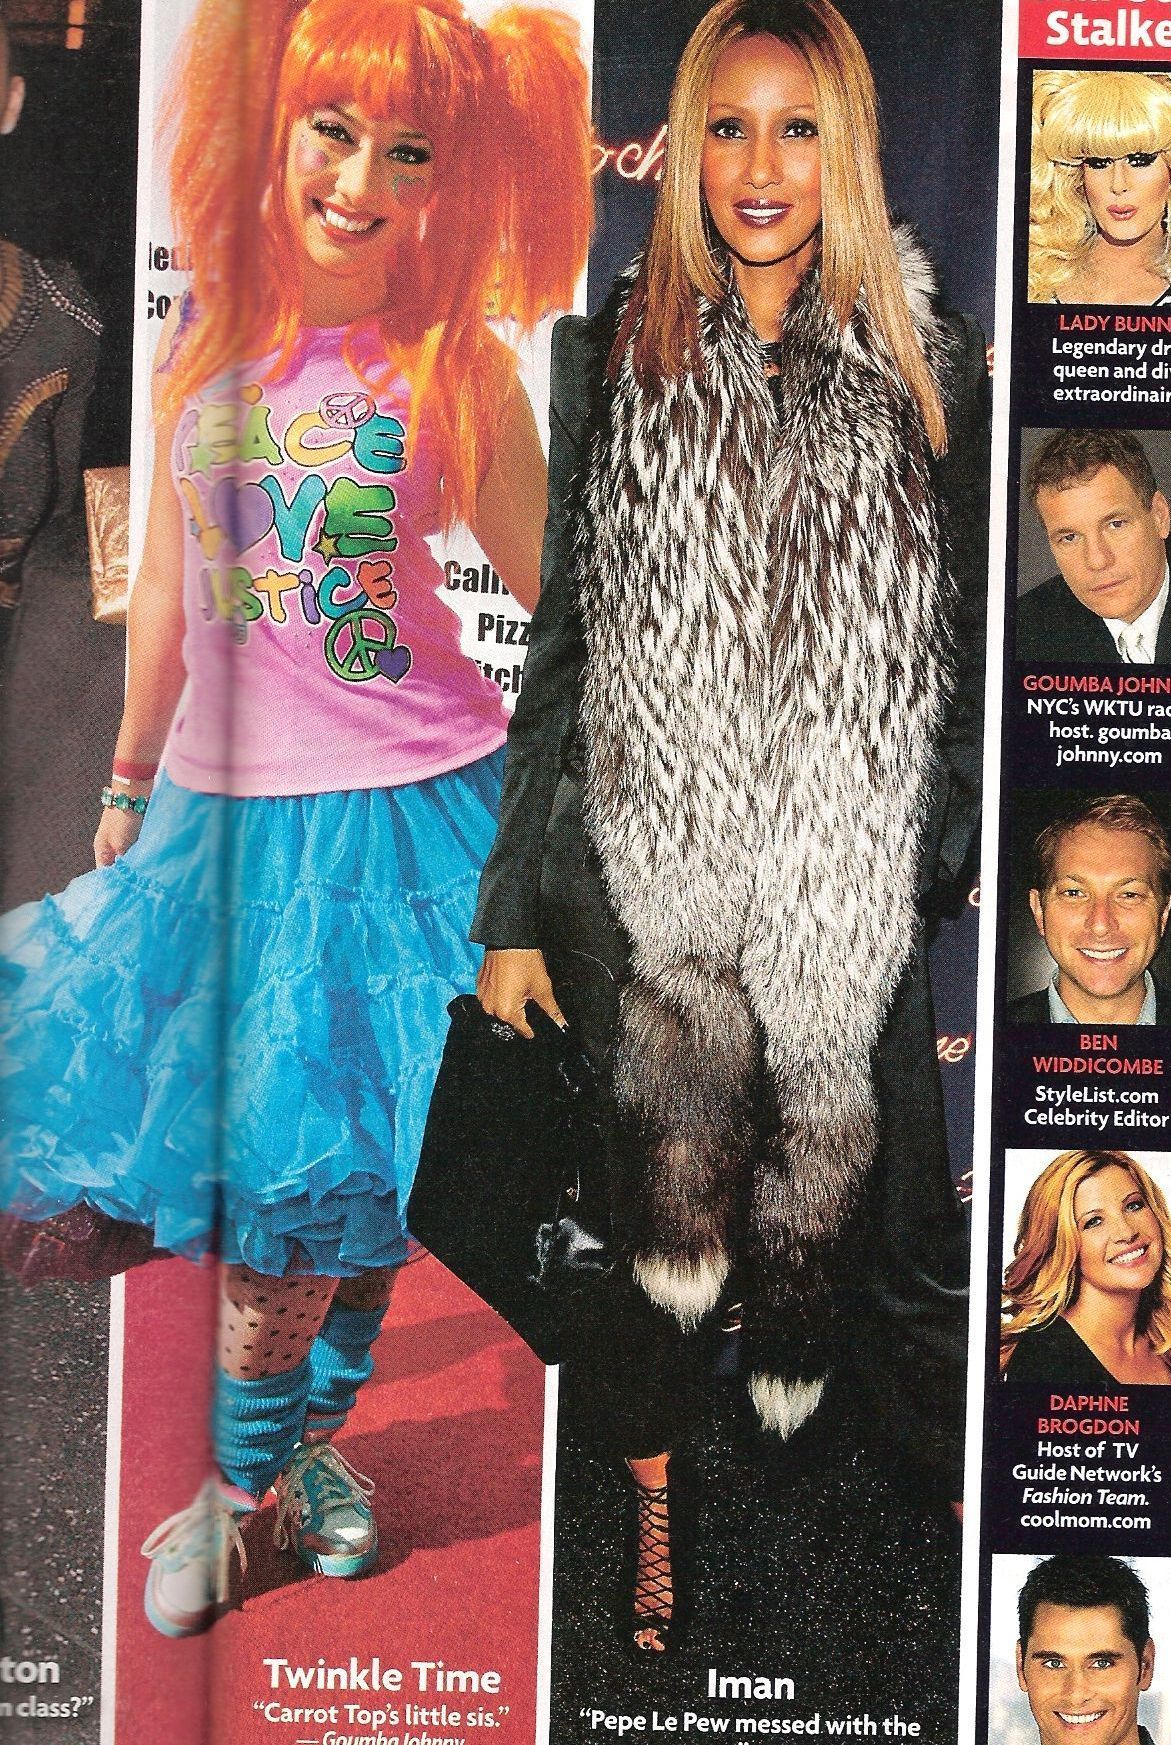 Twinkle Time in December 2009 issue of STAR magazine